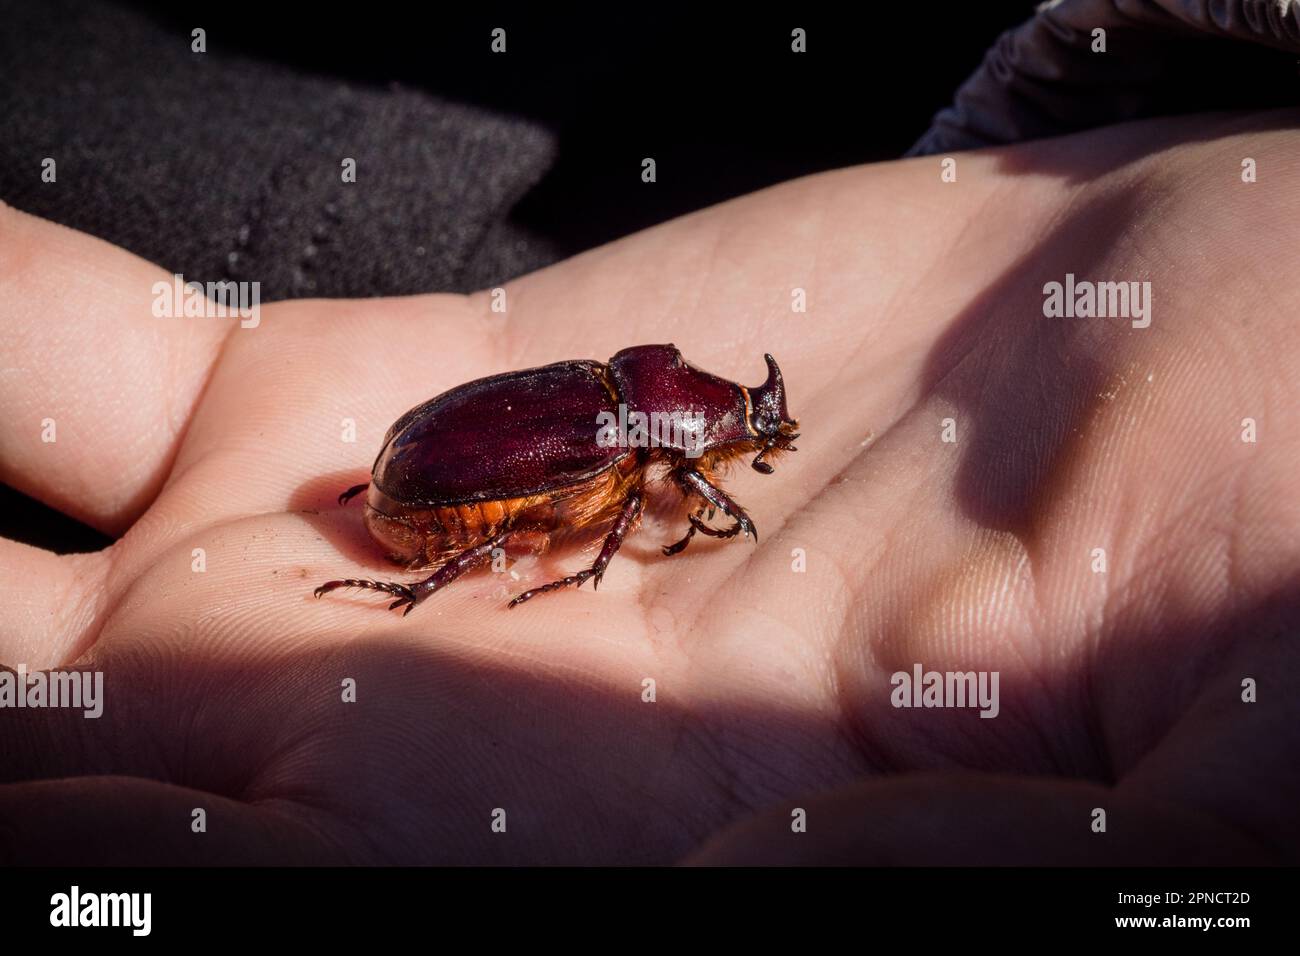 European rhinoceros beetle on child's hand. concept of nature conservation Stock Photo